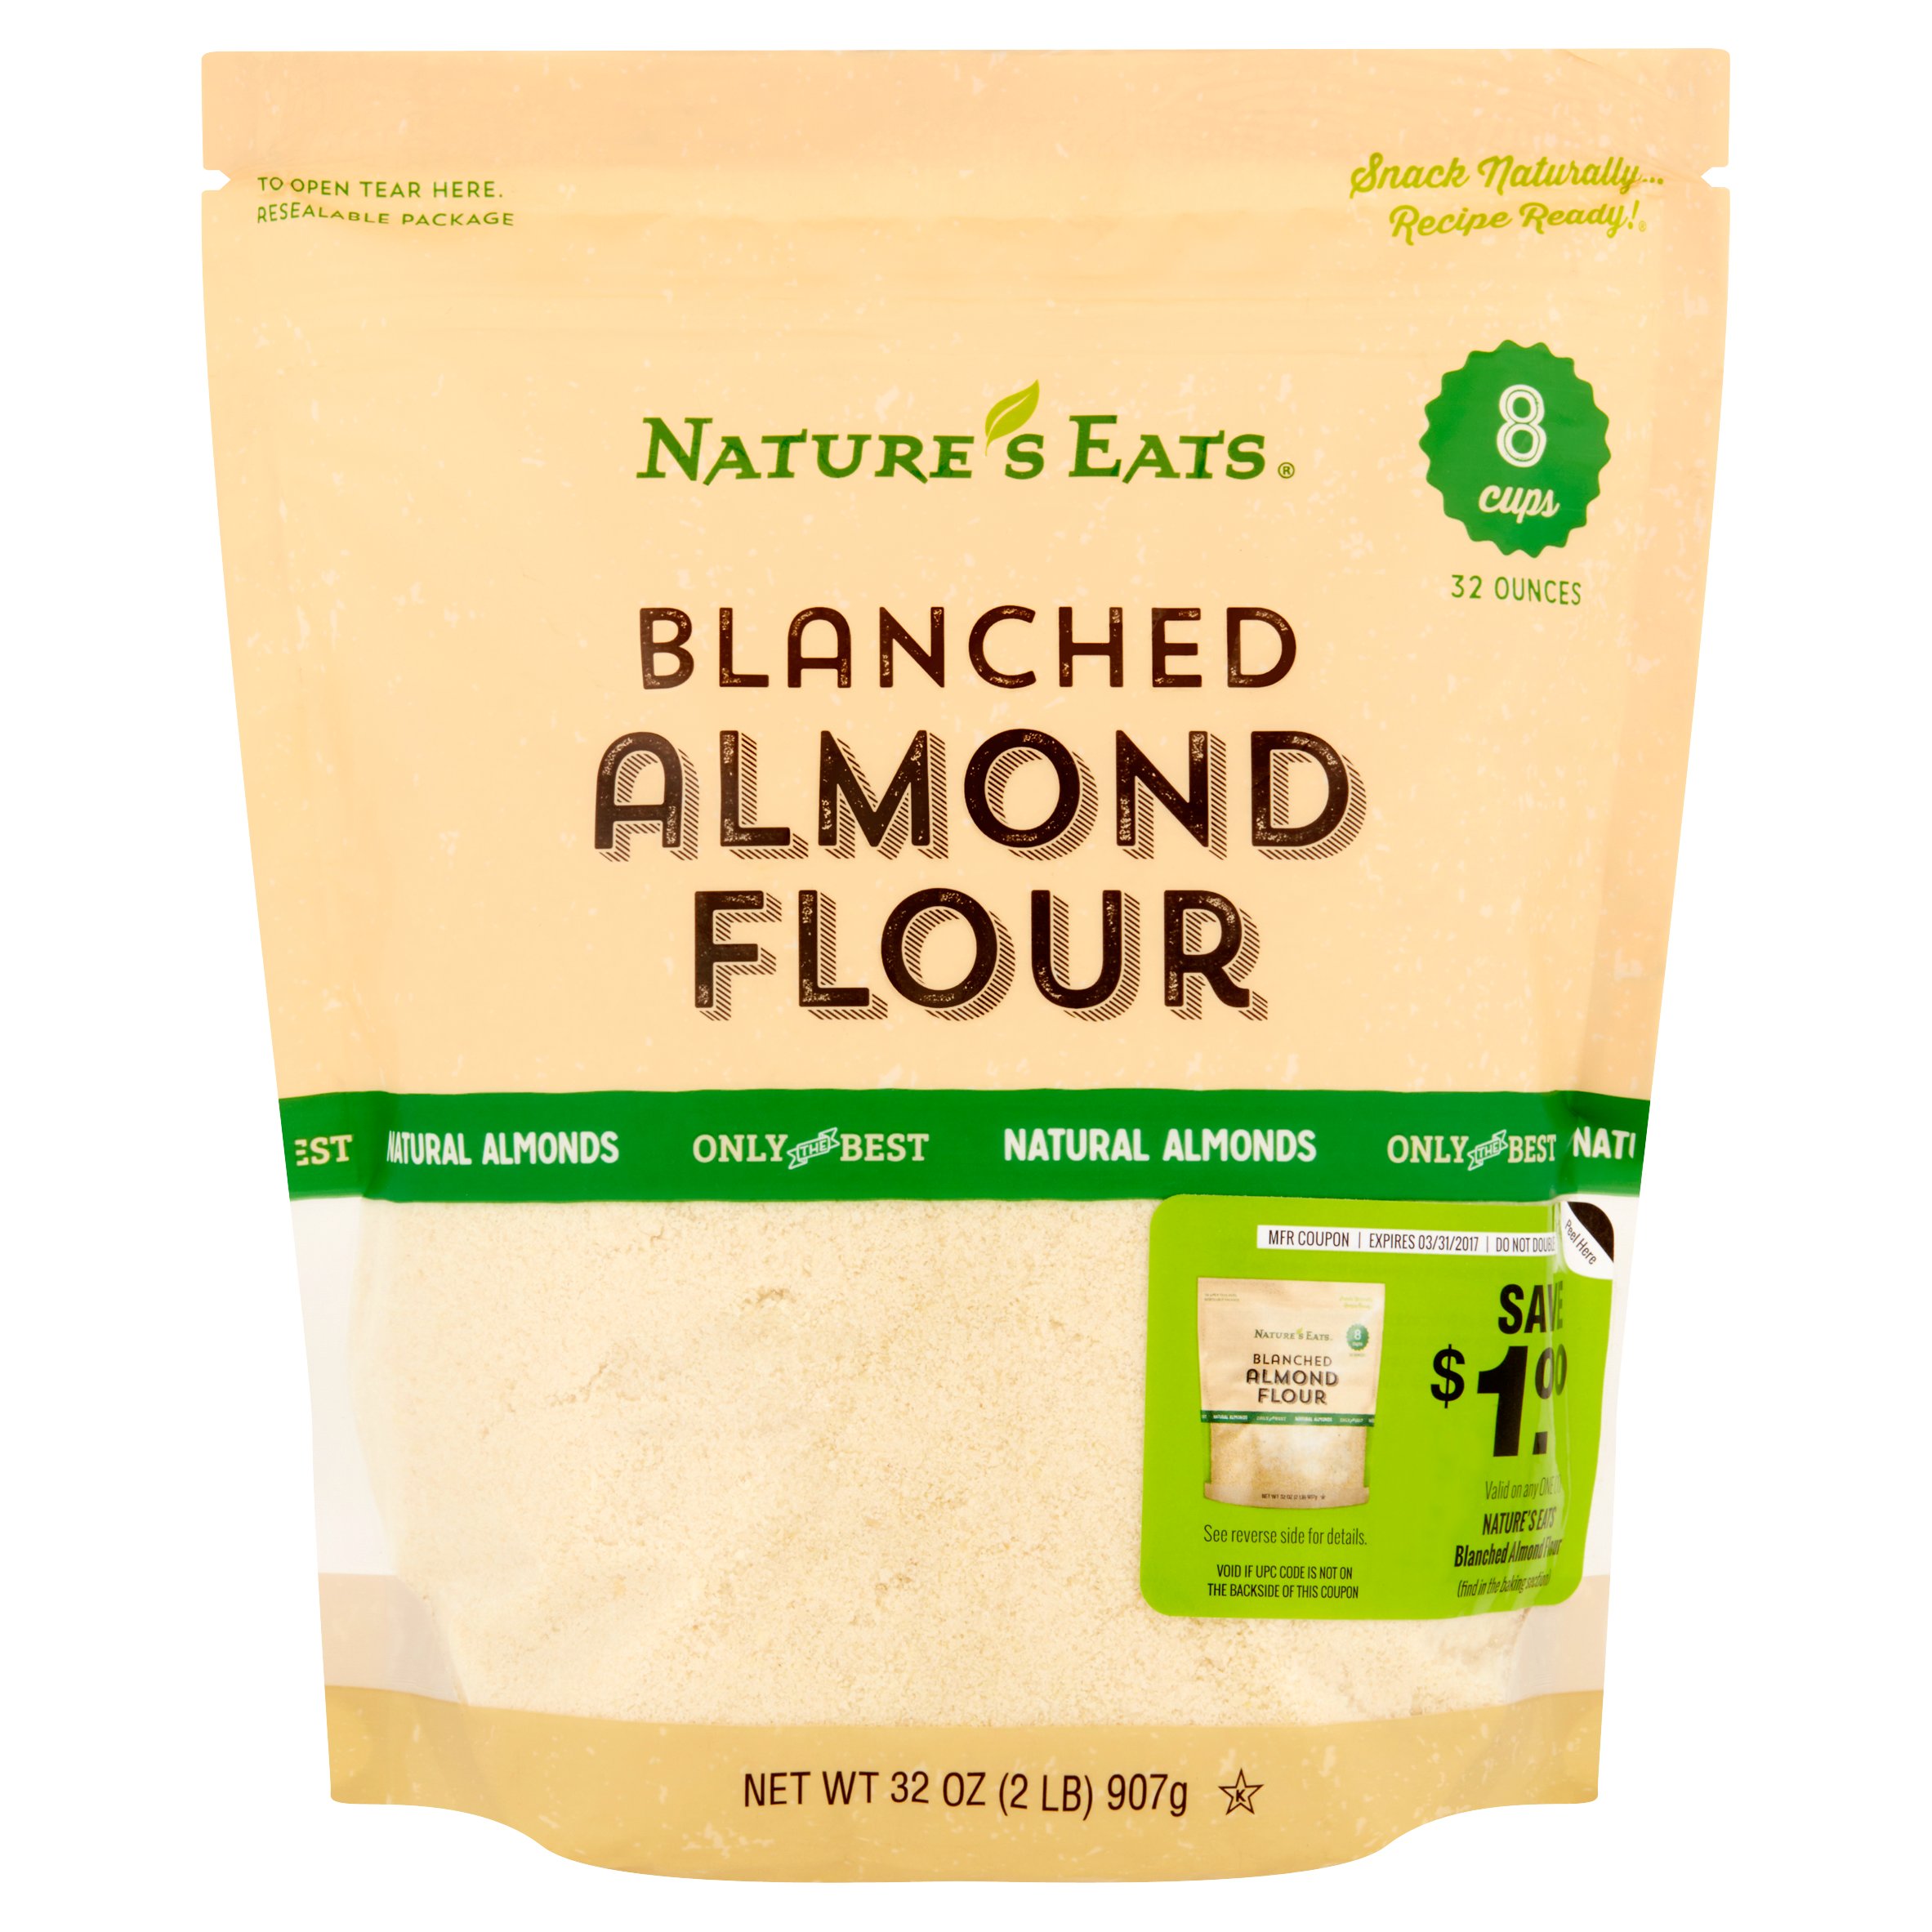 Nature's Eats Blanched Almond Flour, 32 oz - image 3 of 8